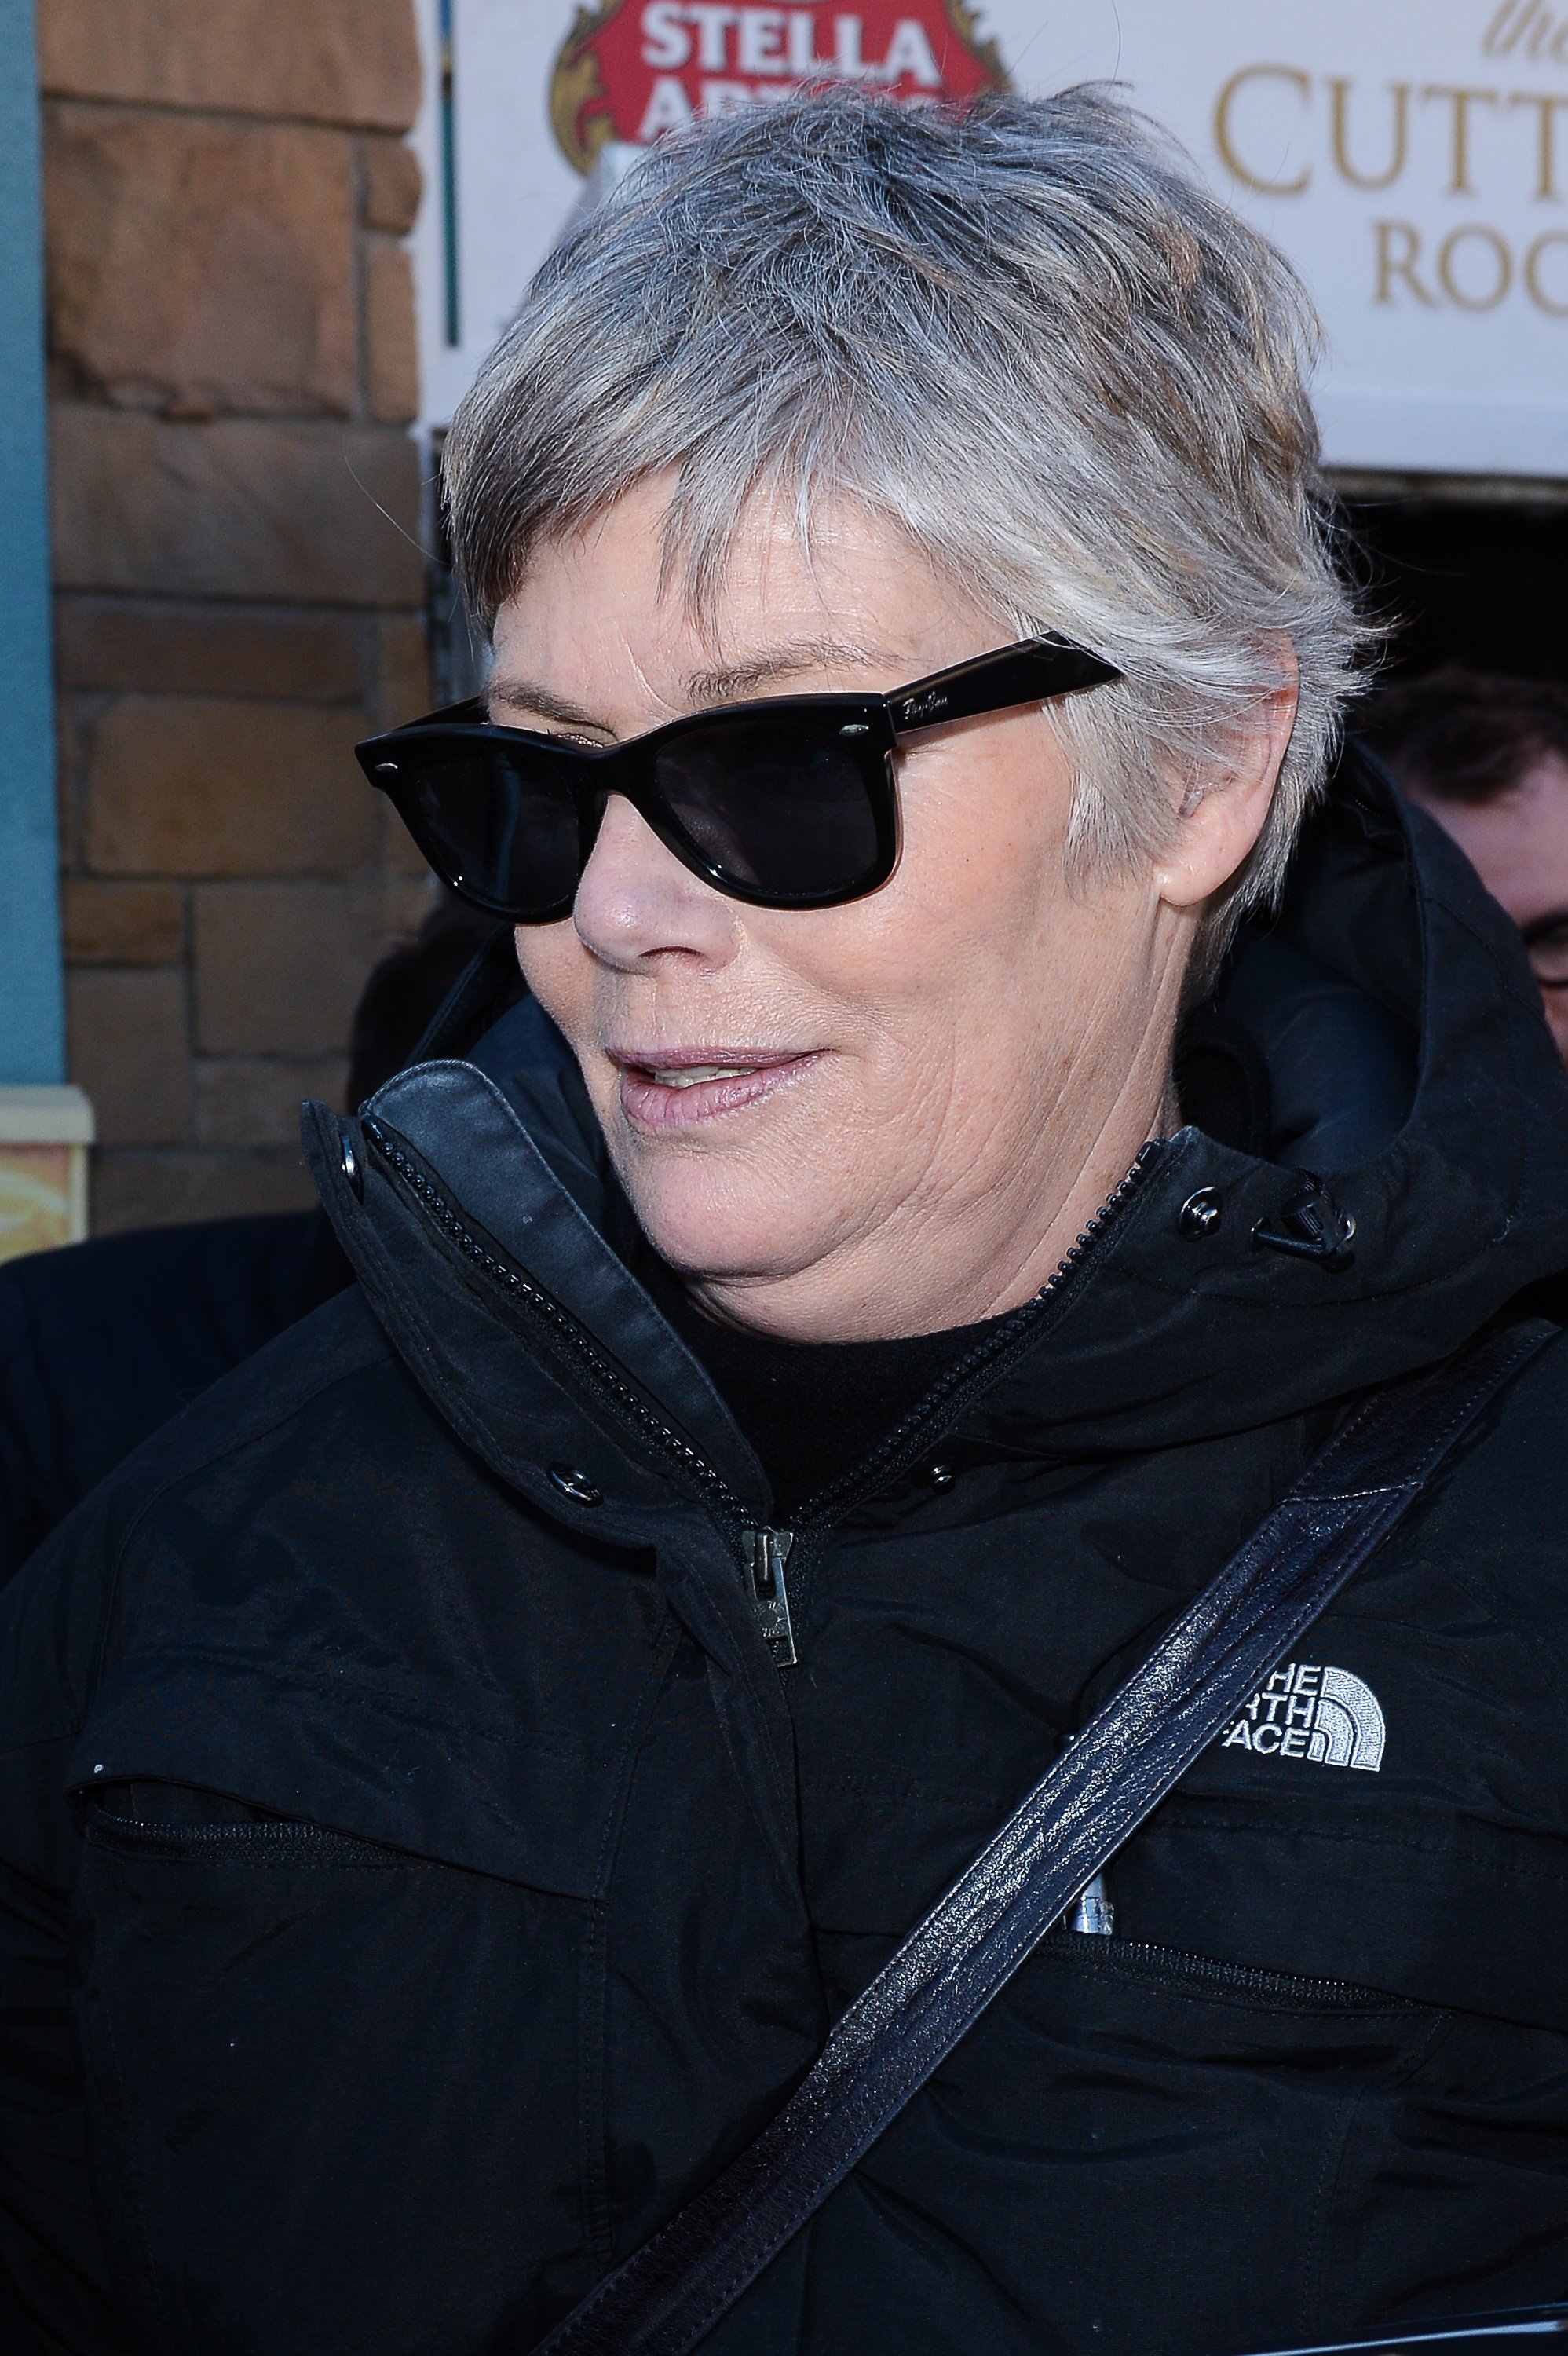 Kelly McGillis on January 19, 2013 in Park City, Utah | Source: Getty Images 